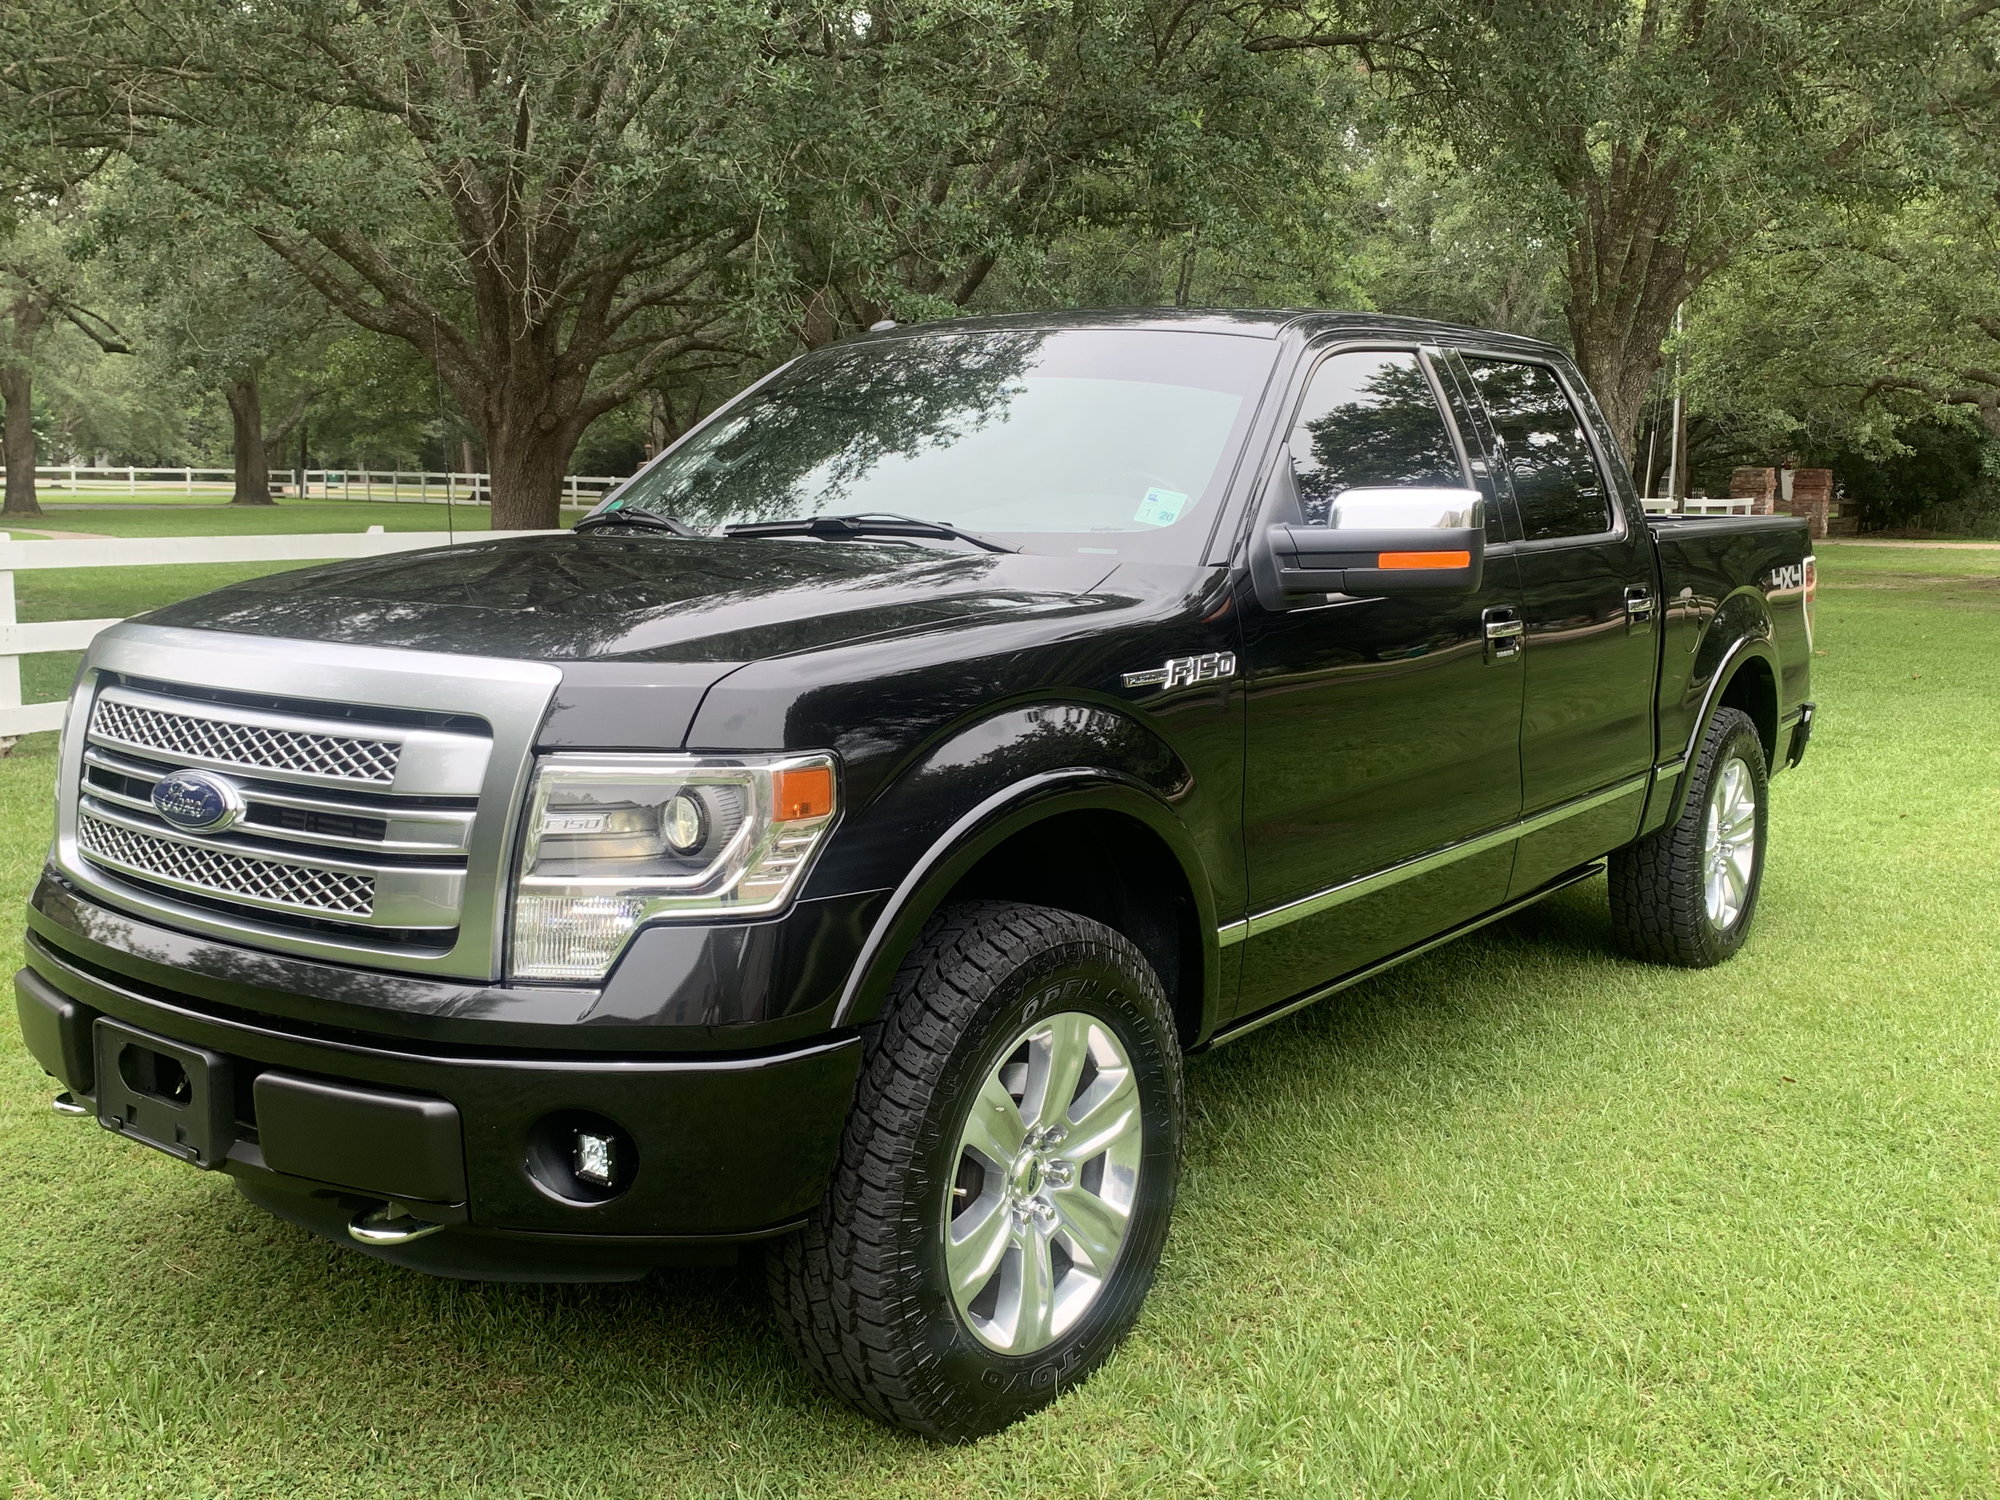 2013 Ford F-150 Platinum 4X4 - Ford Truck Enthusiasts Forums